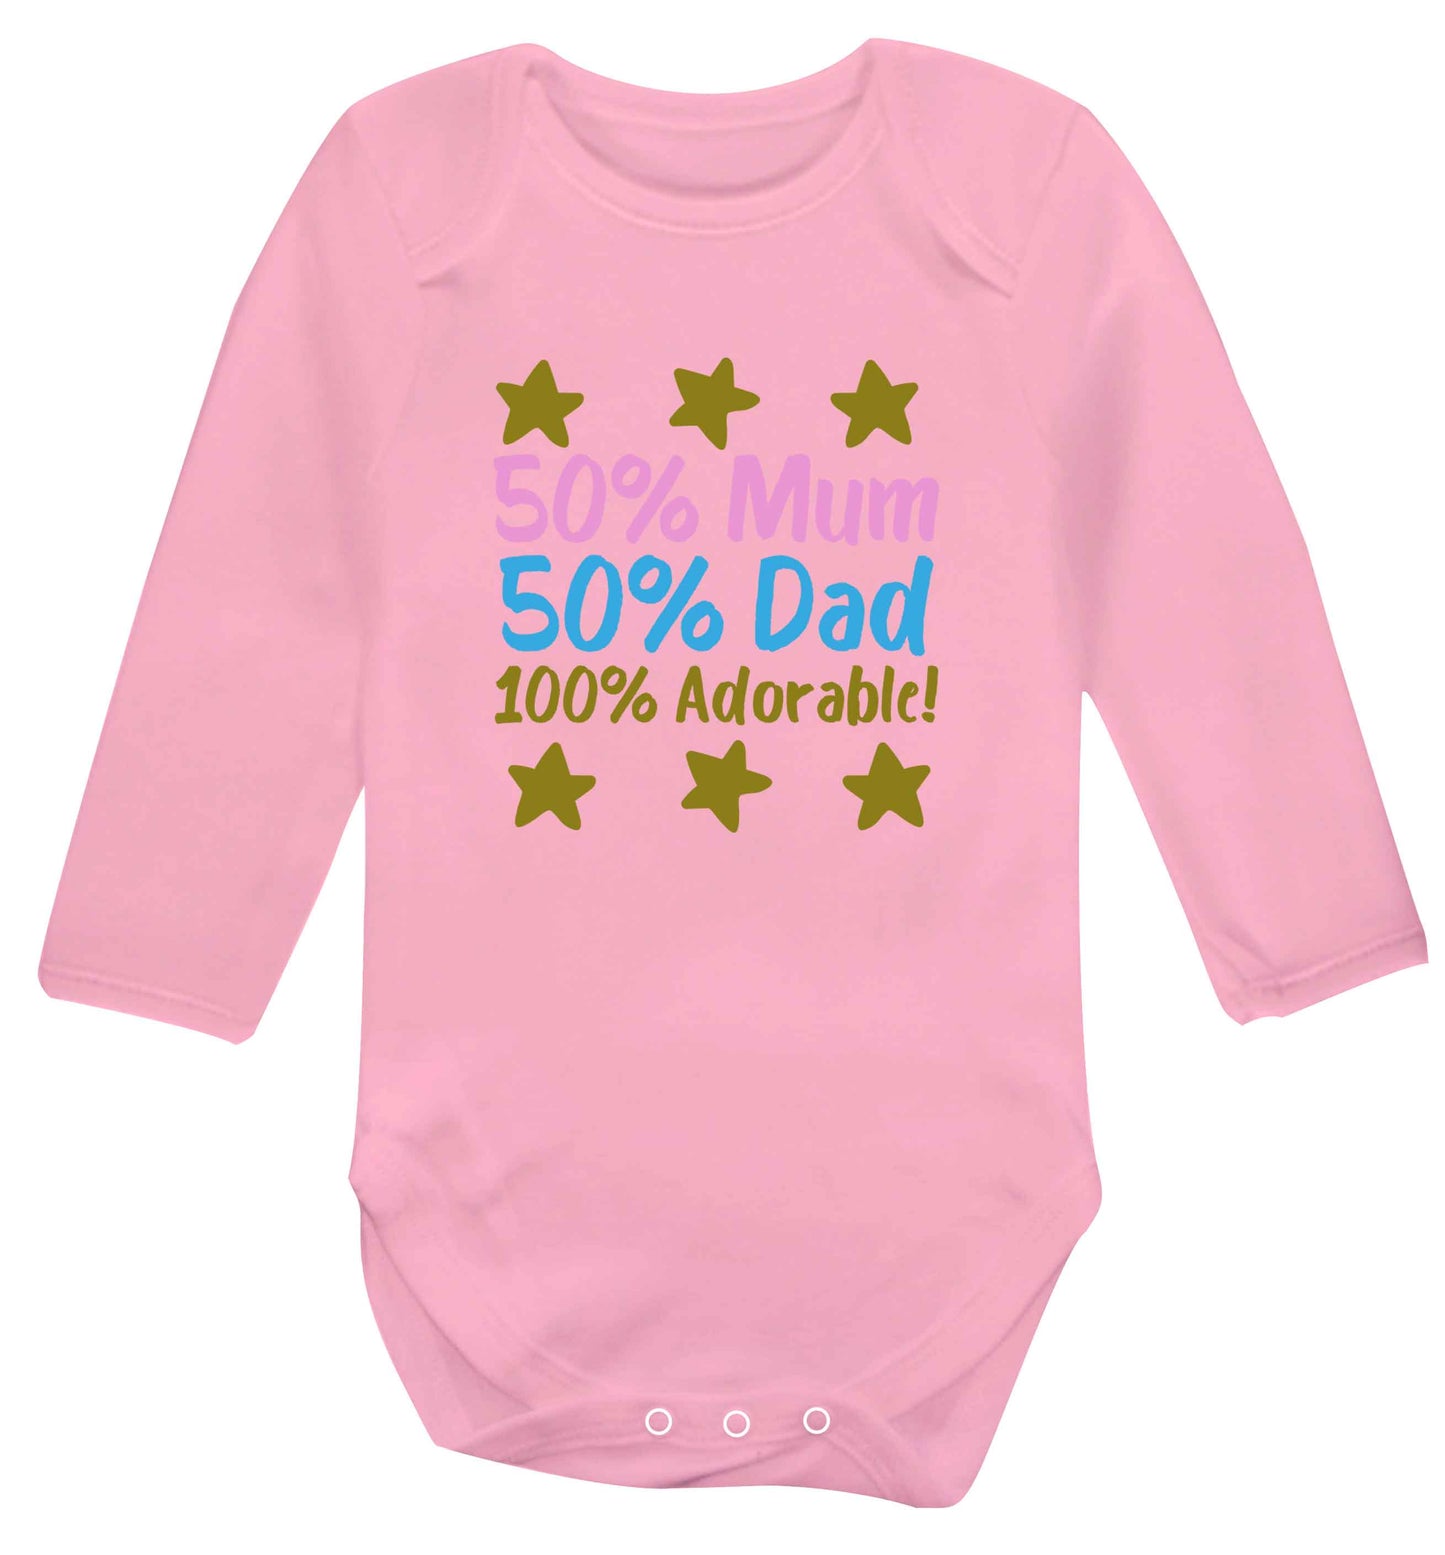 50% mum 50% dad 100% adorable baby vest long sleeved pale pink 6-12 months